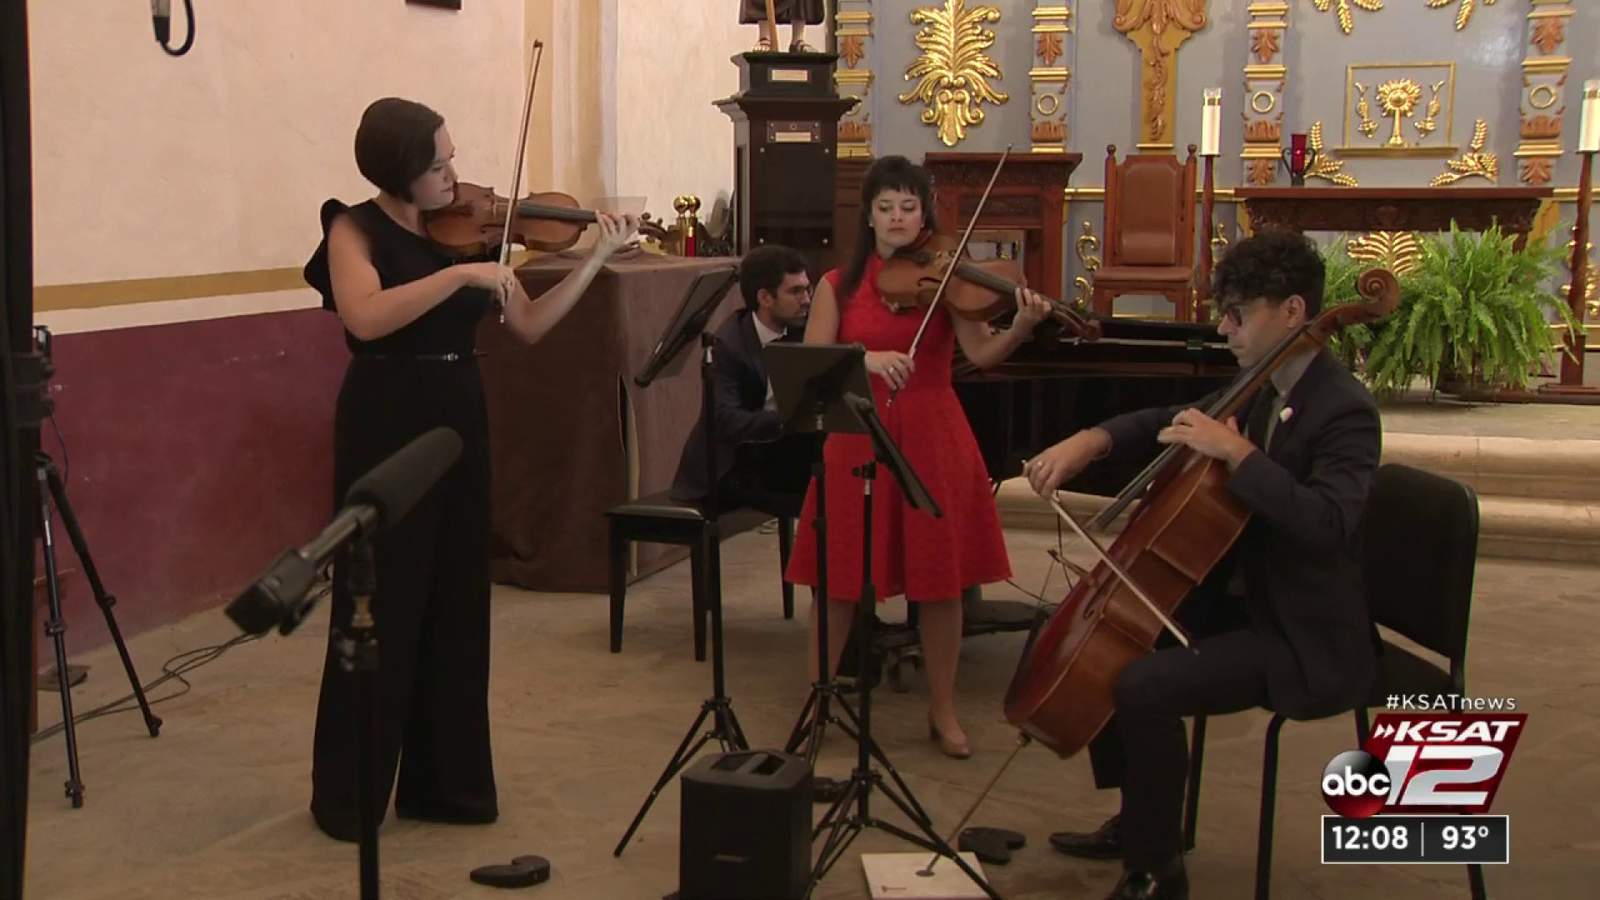 Mission San Jose to mark Tricentennial with classical music